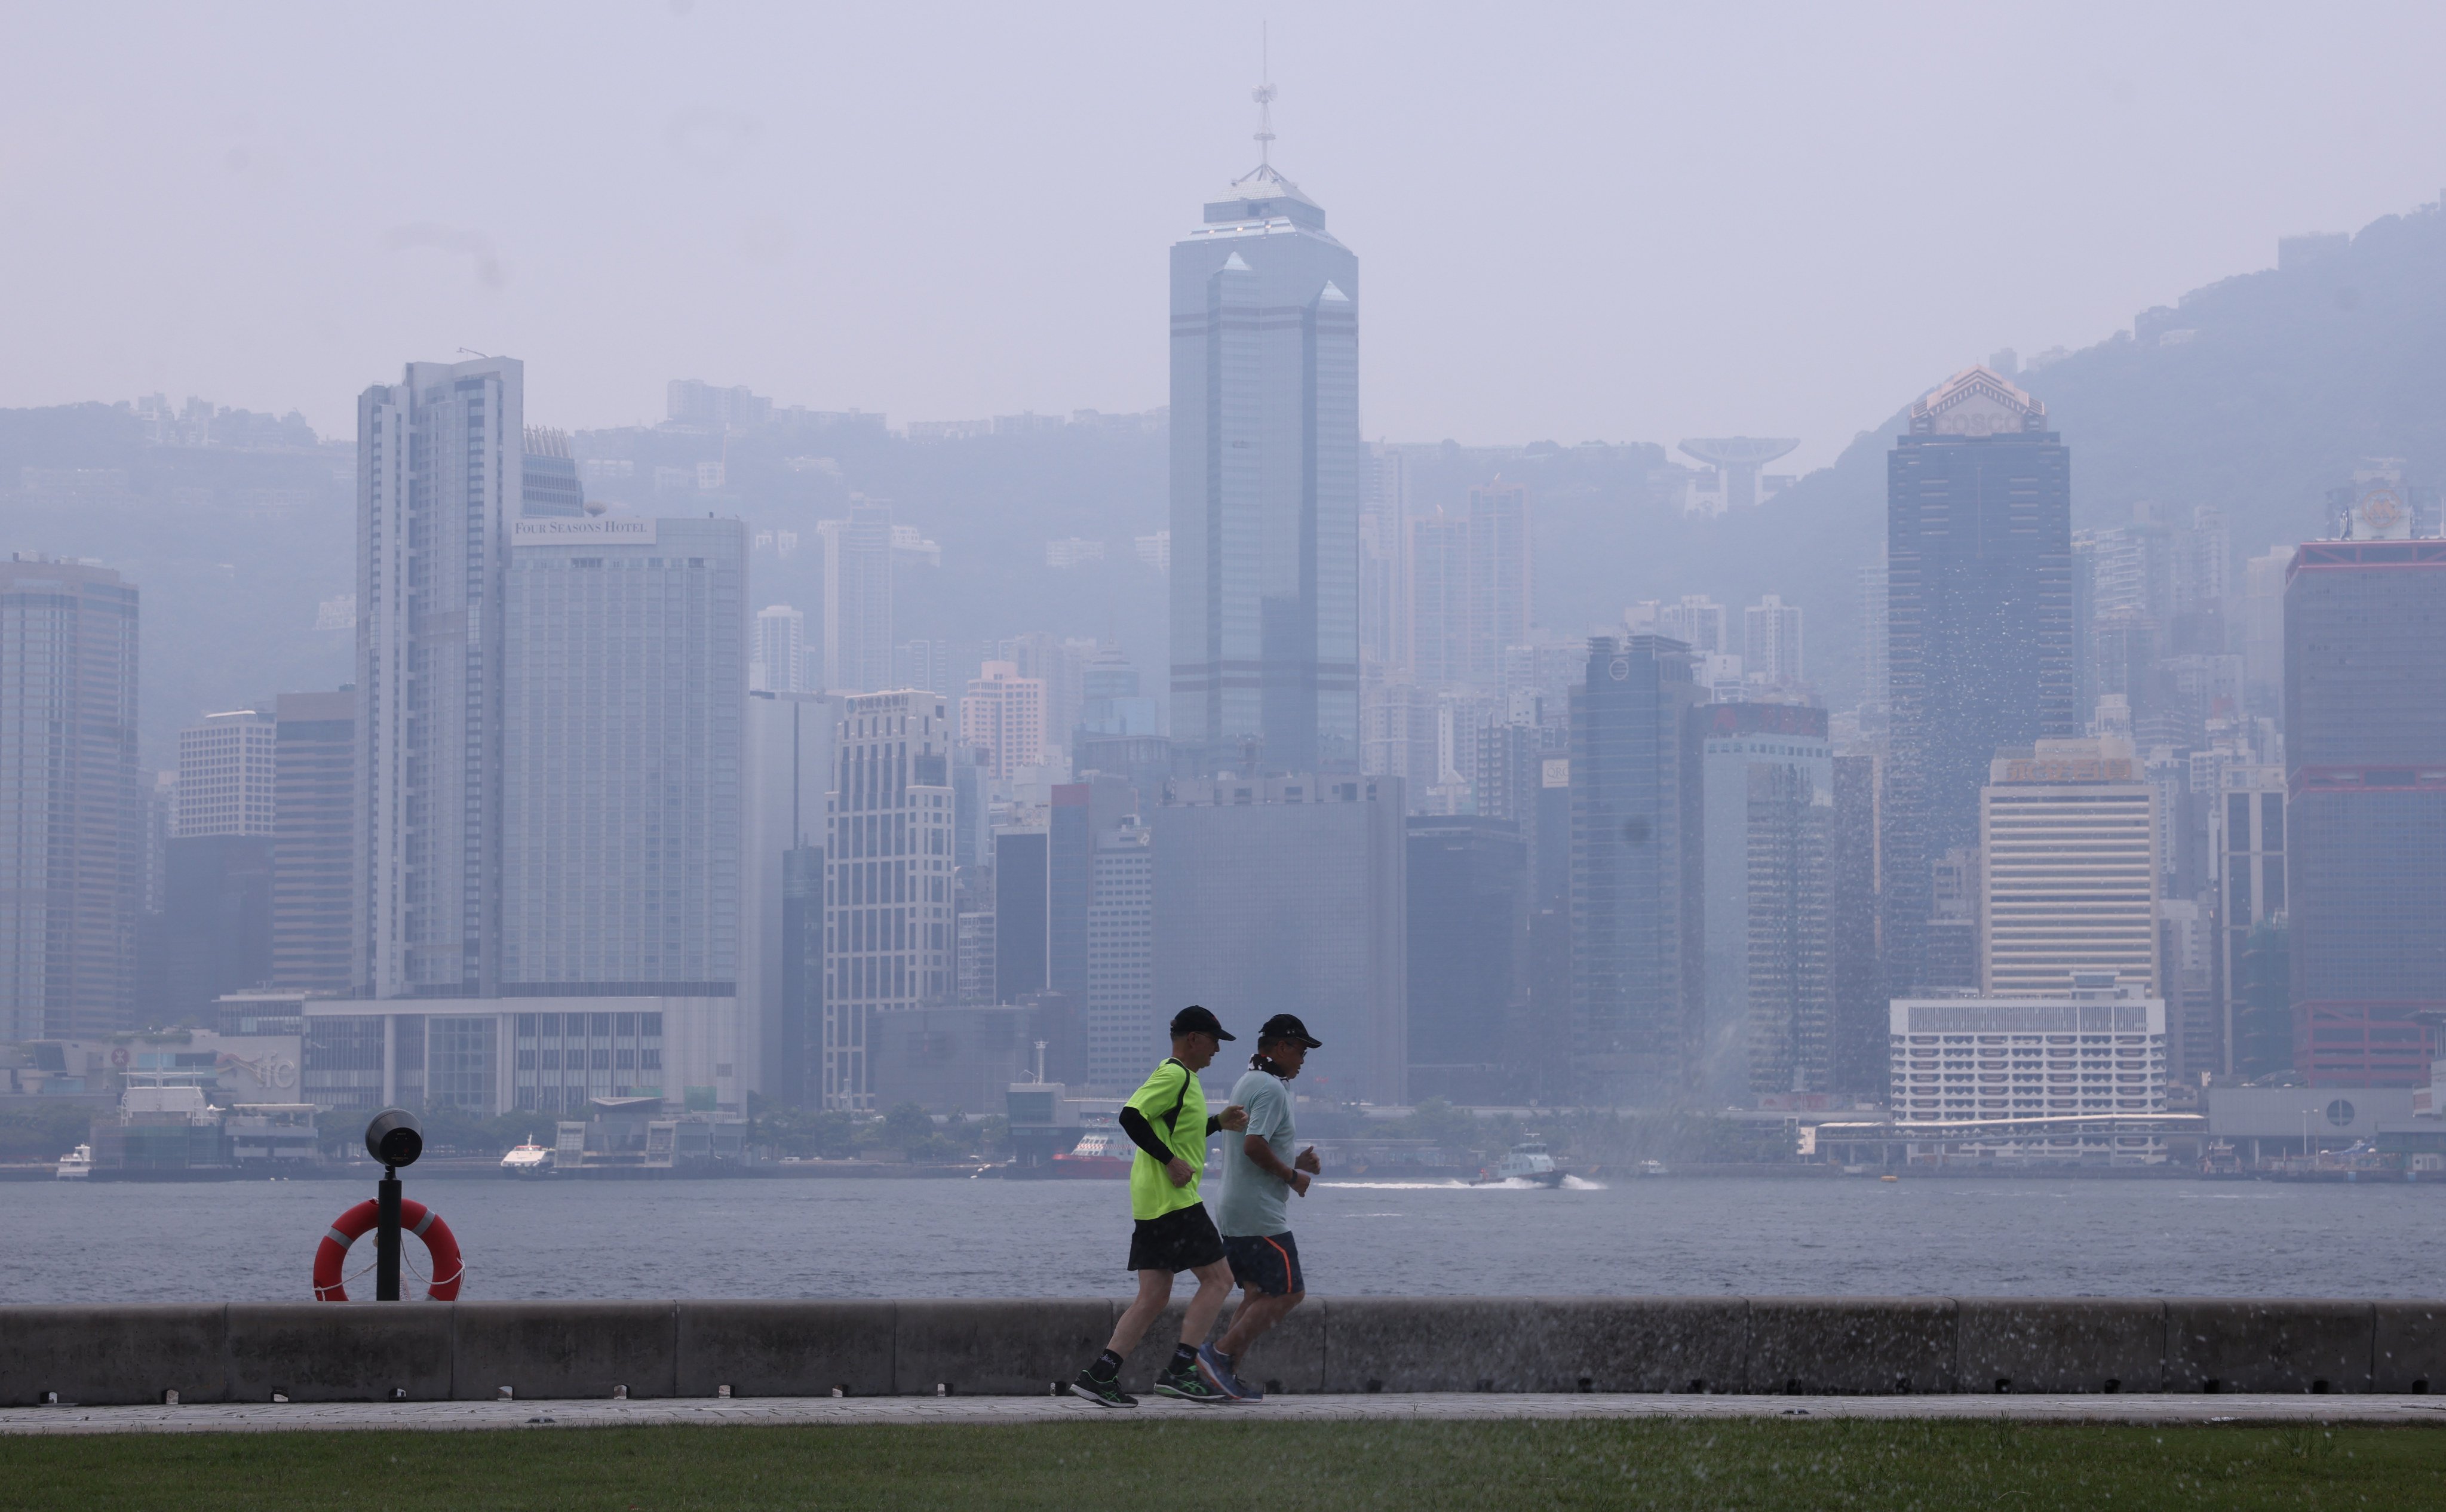 Joggers at the West Kowloon Art Park on July 26, a particularly smoggy day due to a typhoon in the region. Photo: May Tse